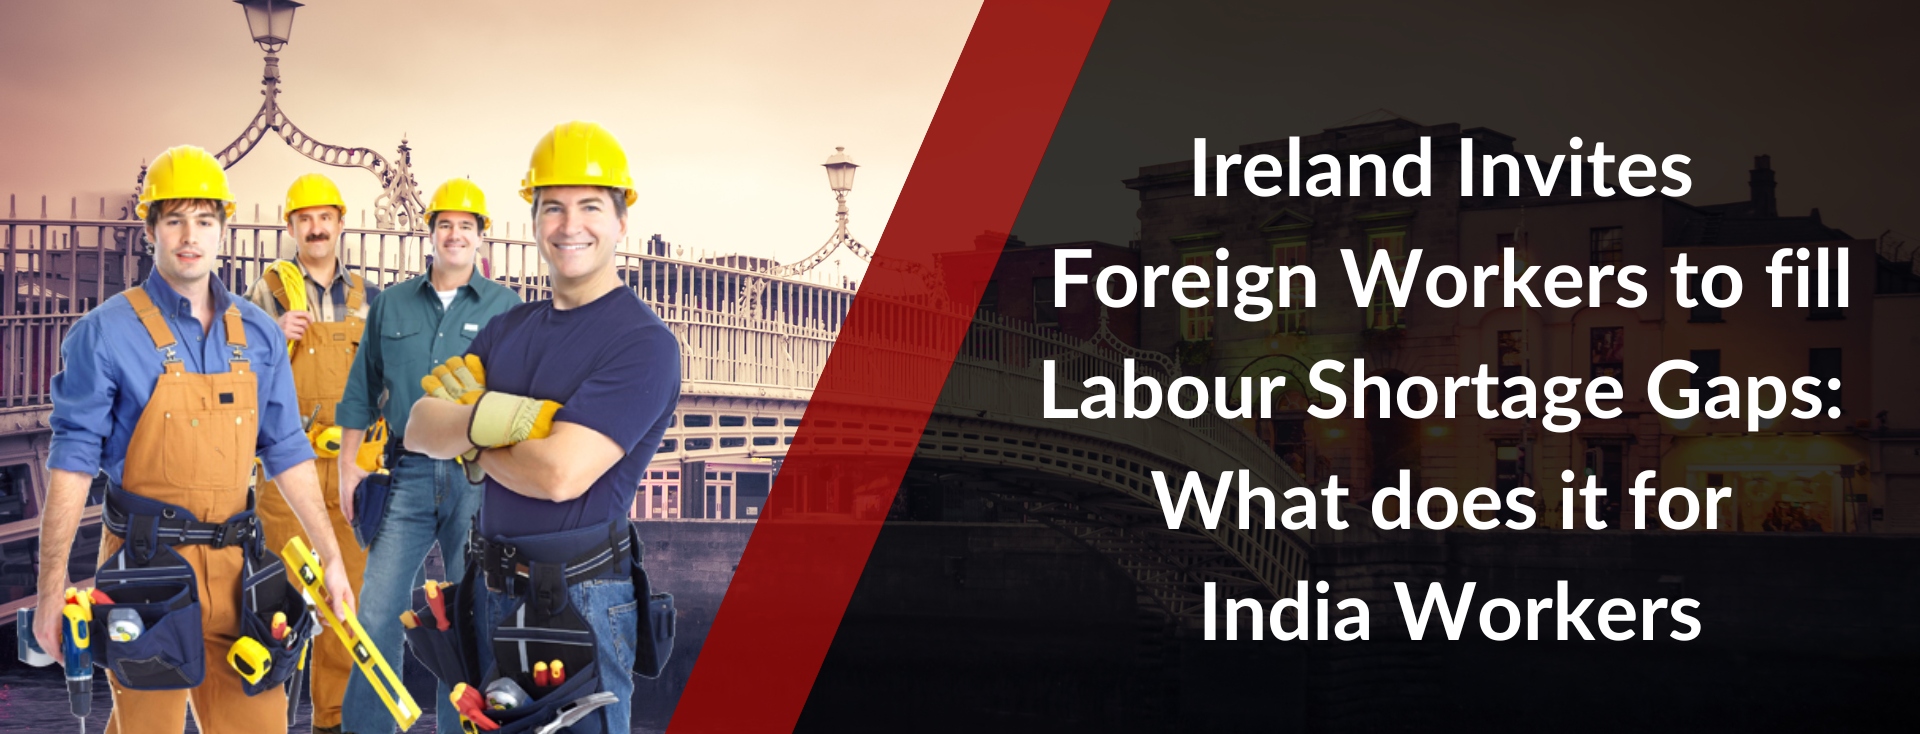 Ireland Invites Foreign Workers to fill Labour Shortage Gaps: What does it for India Workers